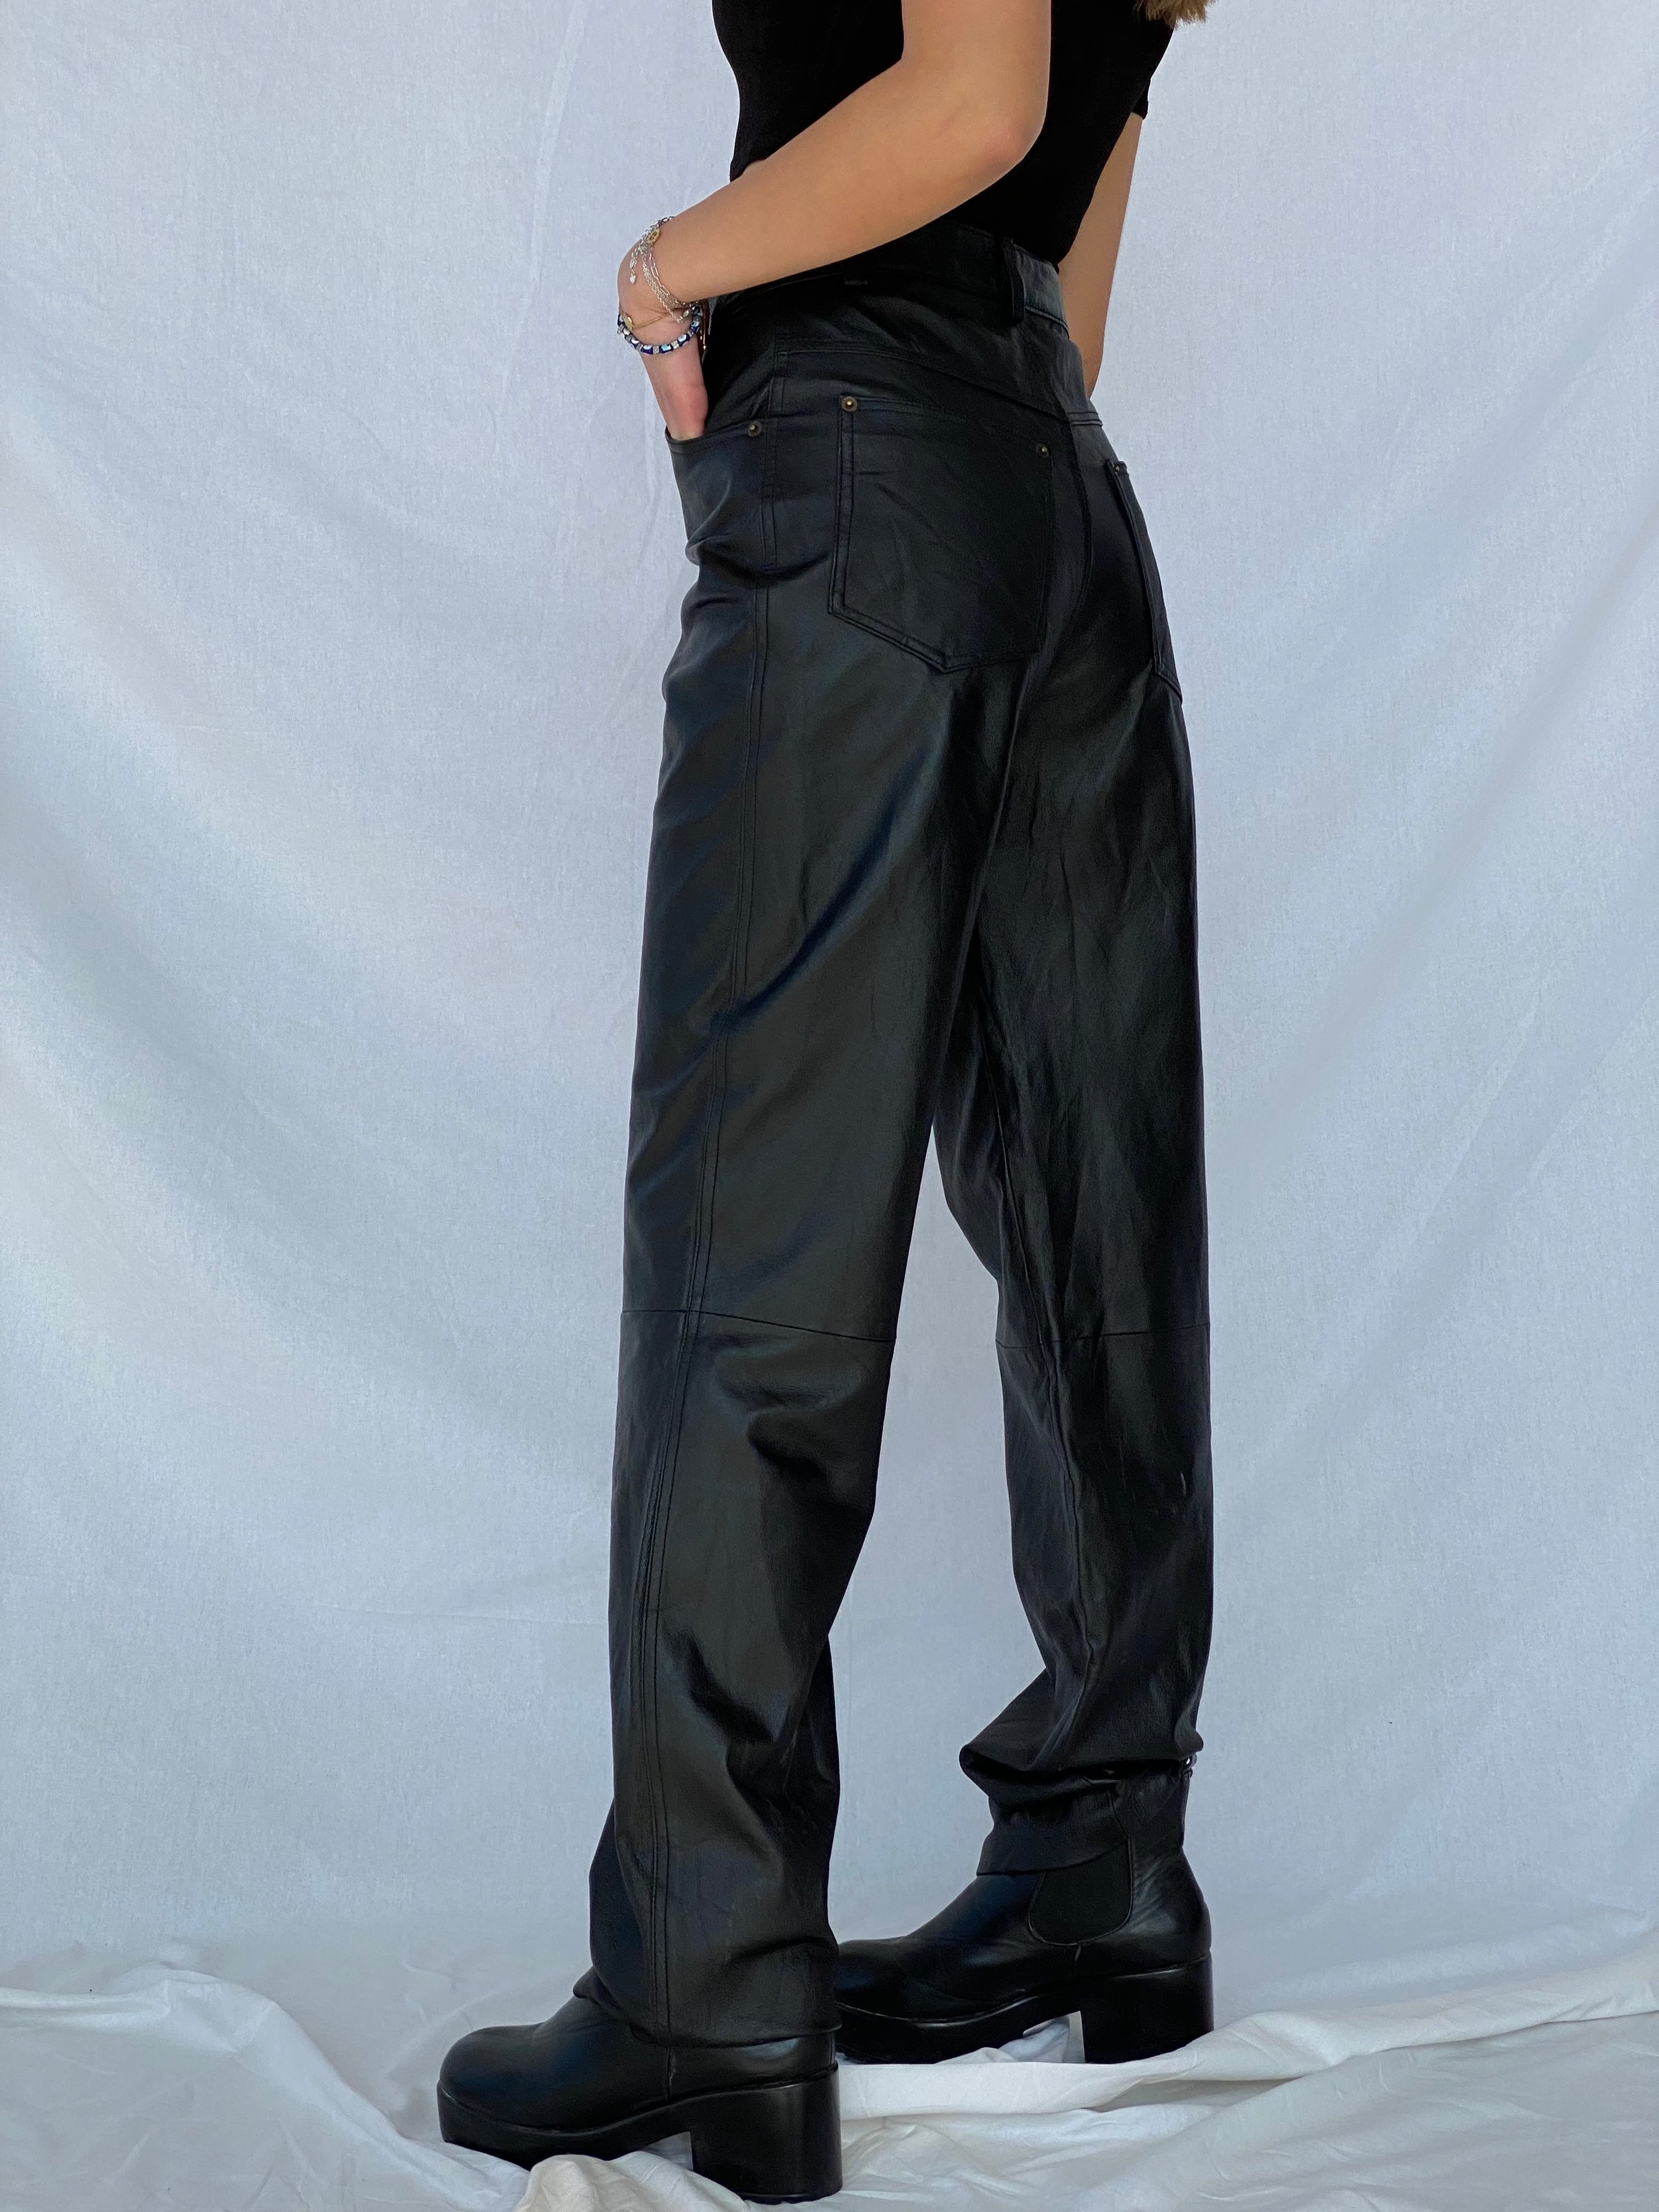 Authentic Clothing Company Leather Pants - Balagan Vintage Leather Pants 90s, black leather, genuine leather, leather, vintage